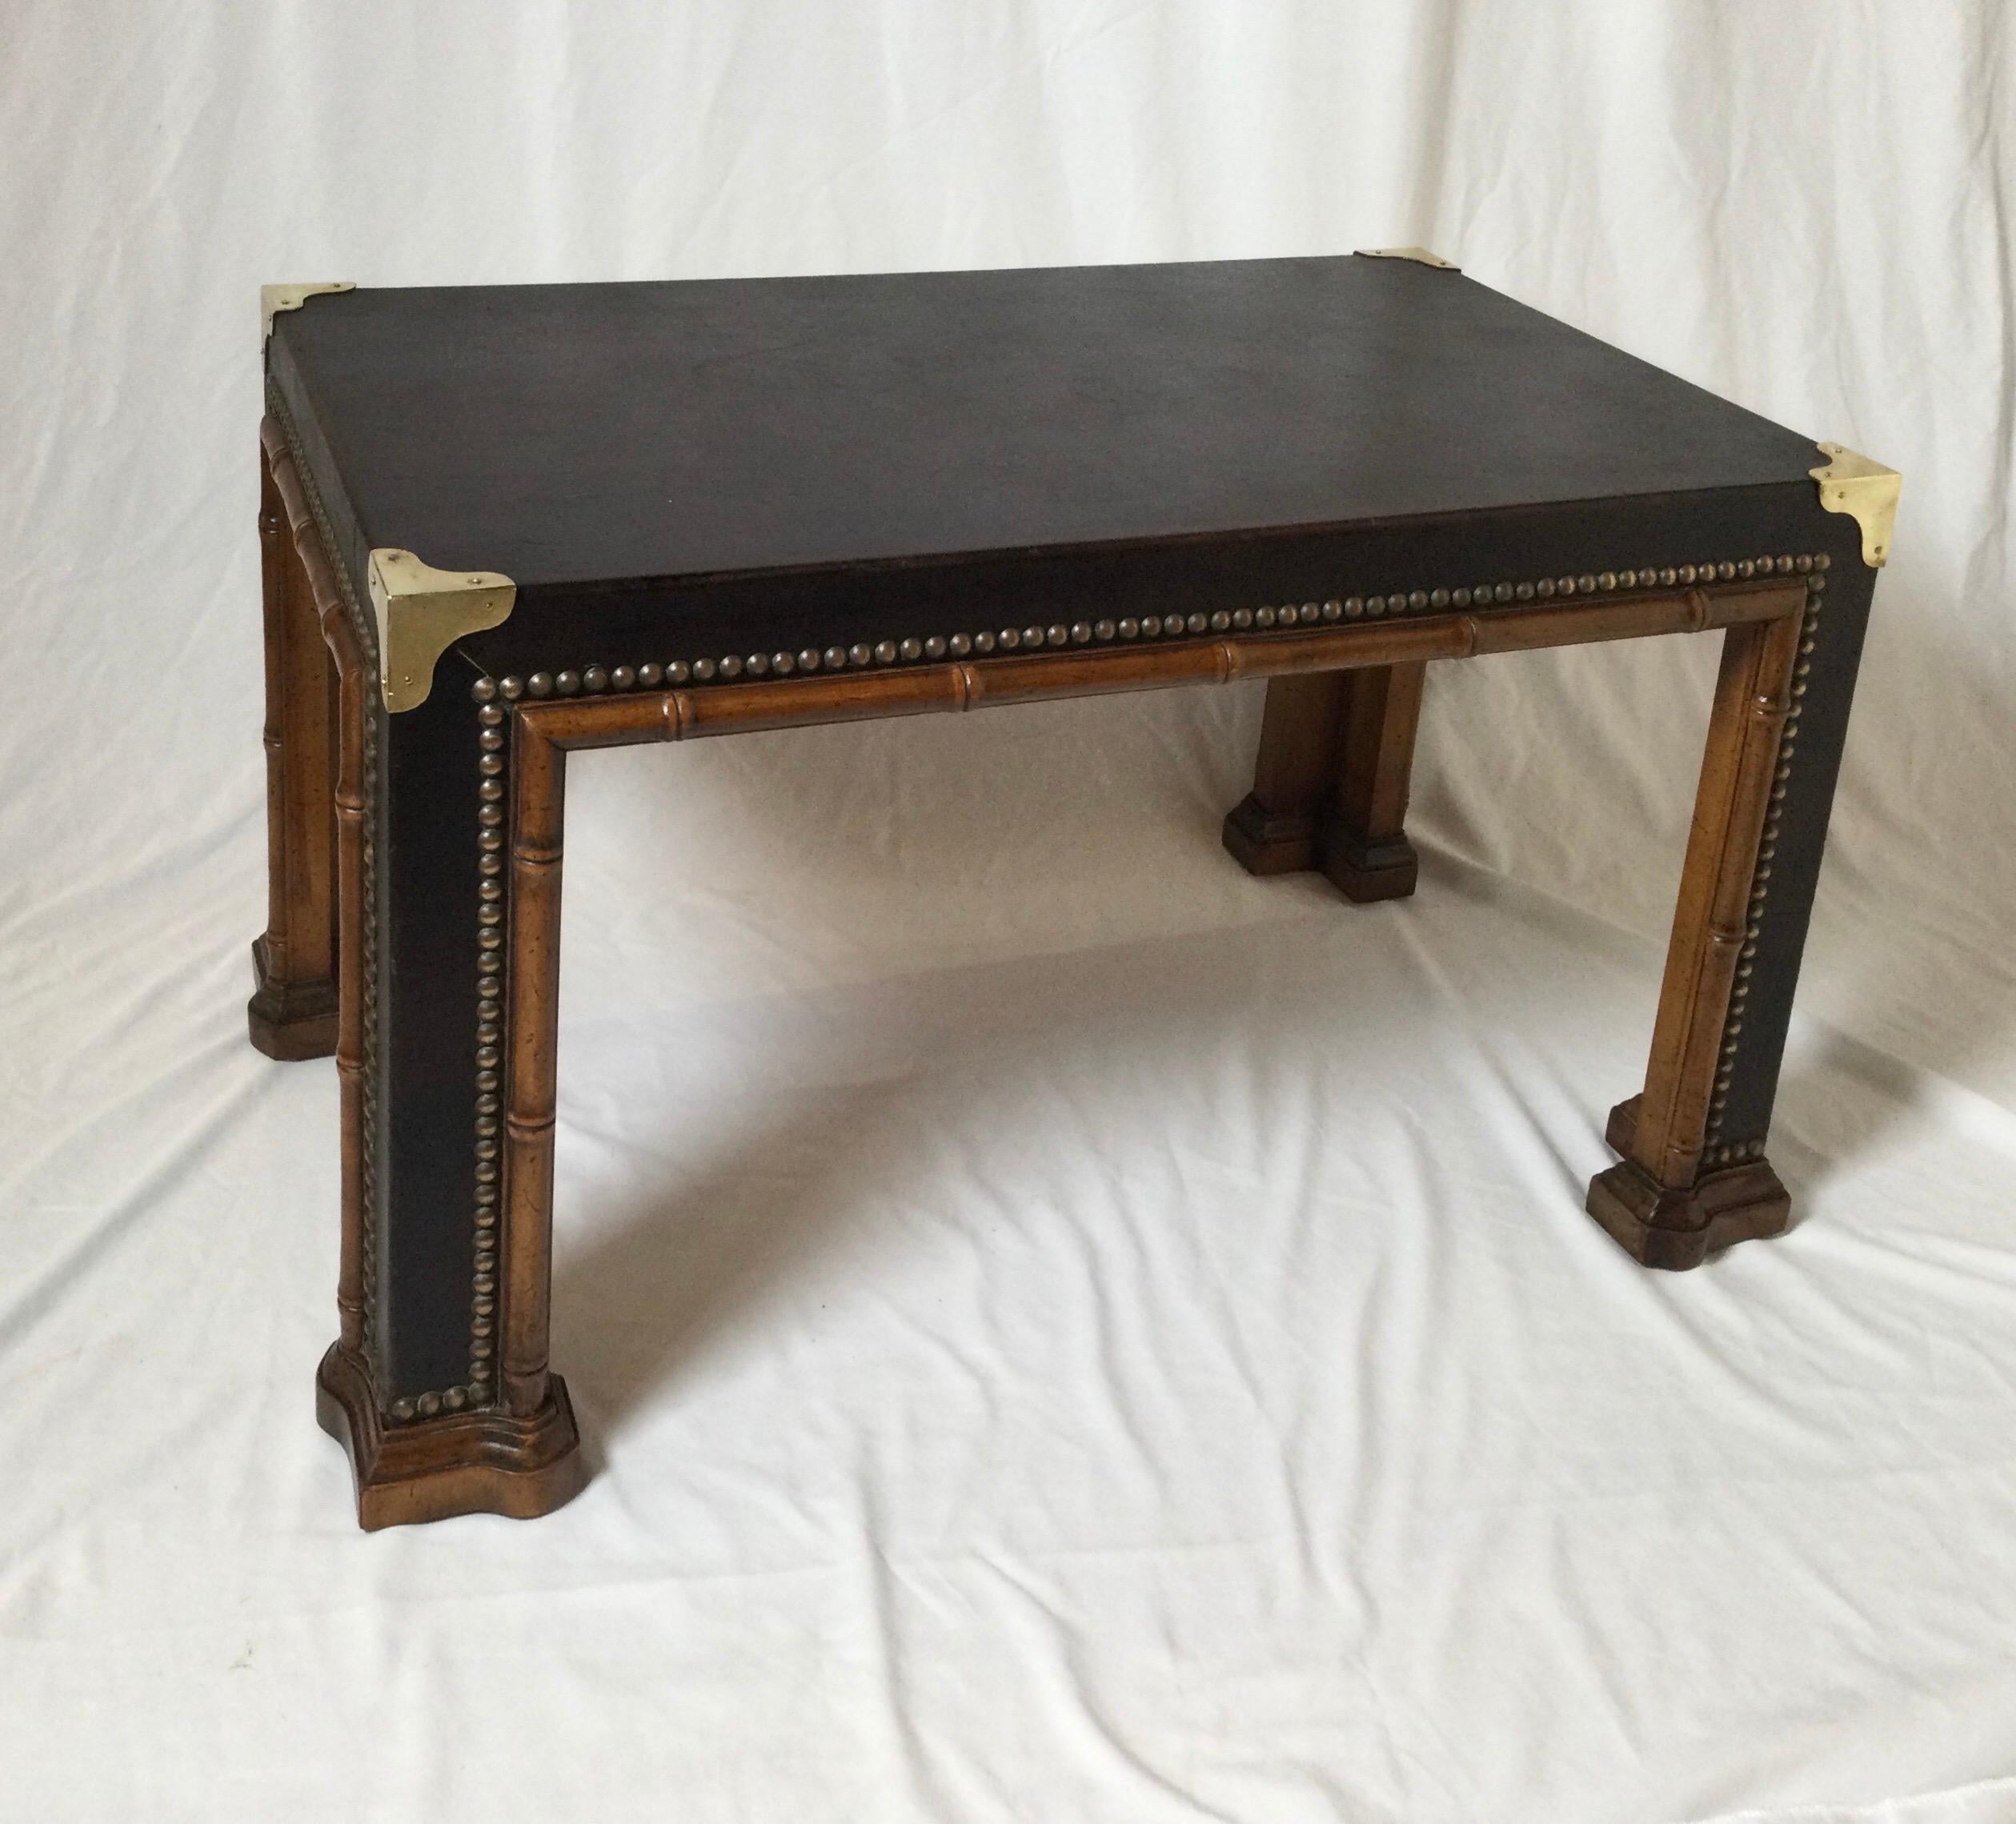 Vintage leather covered cocktail table with faux carved bamboo and brass trim. The tabaco color leather with brass nail head trim with brass corner pieces. Smallish size at 30 inches wide, 18 inches deep, 17.5 inches tall.